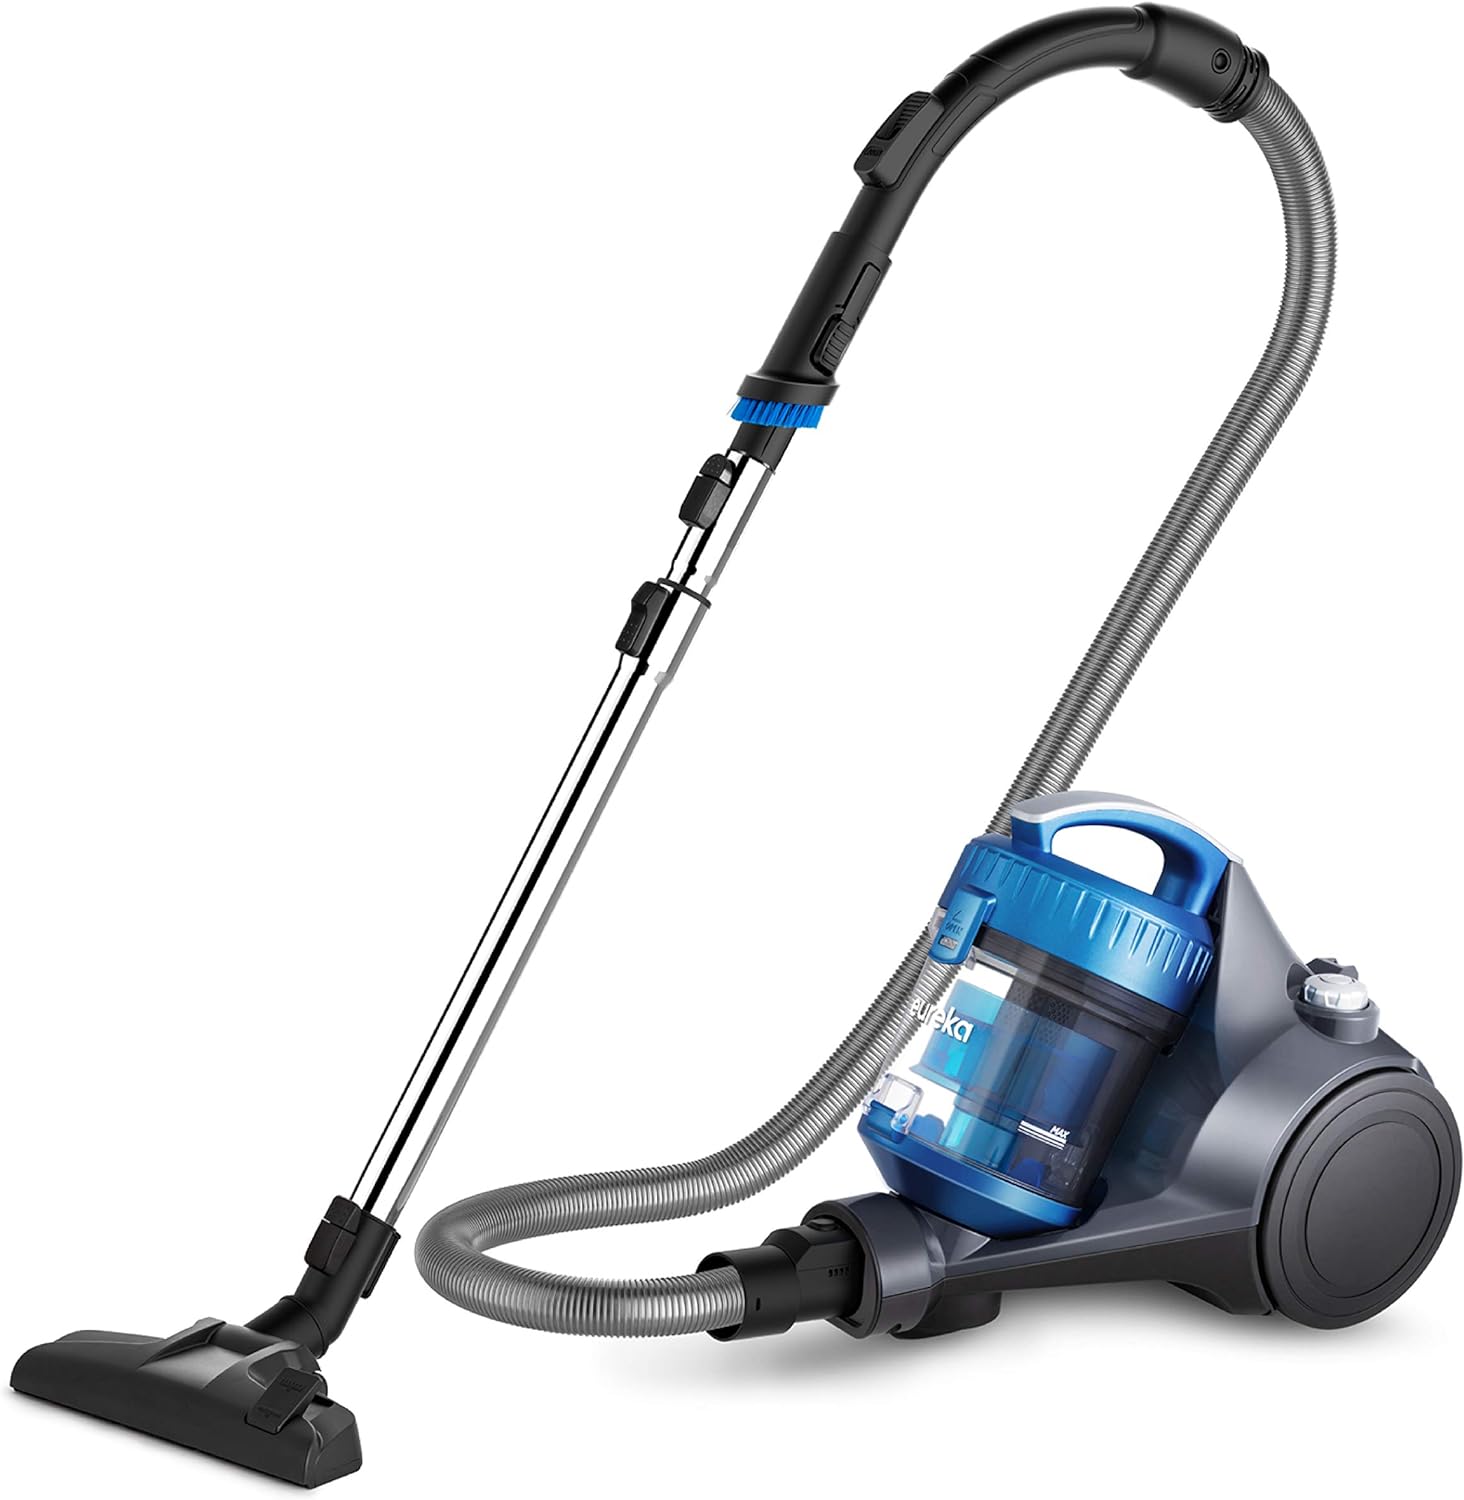 Eureka NEN110A Bagless Canister Vacuum Cleaner, Lightweight Corded Vacuum for Carpets and Hard Floors, Blue - image 1 of 5